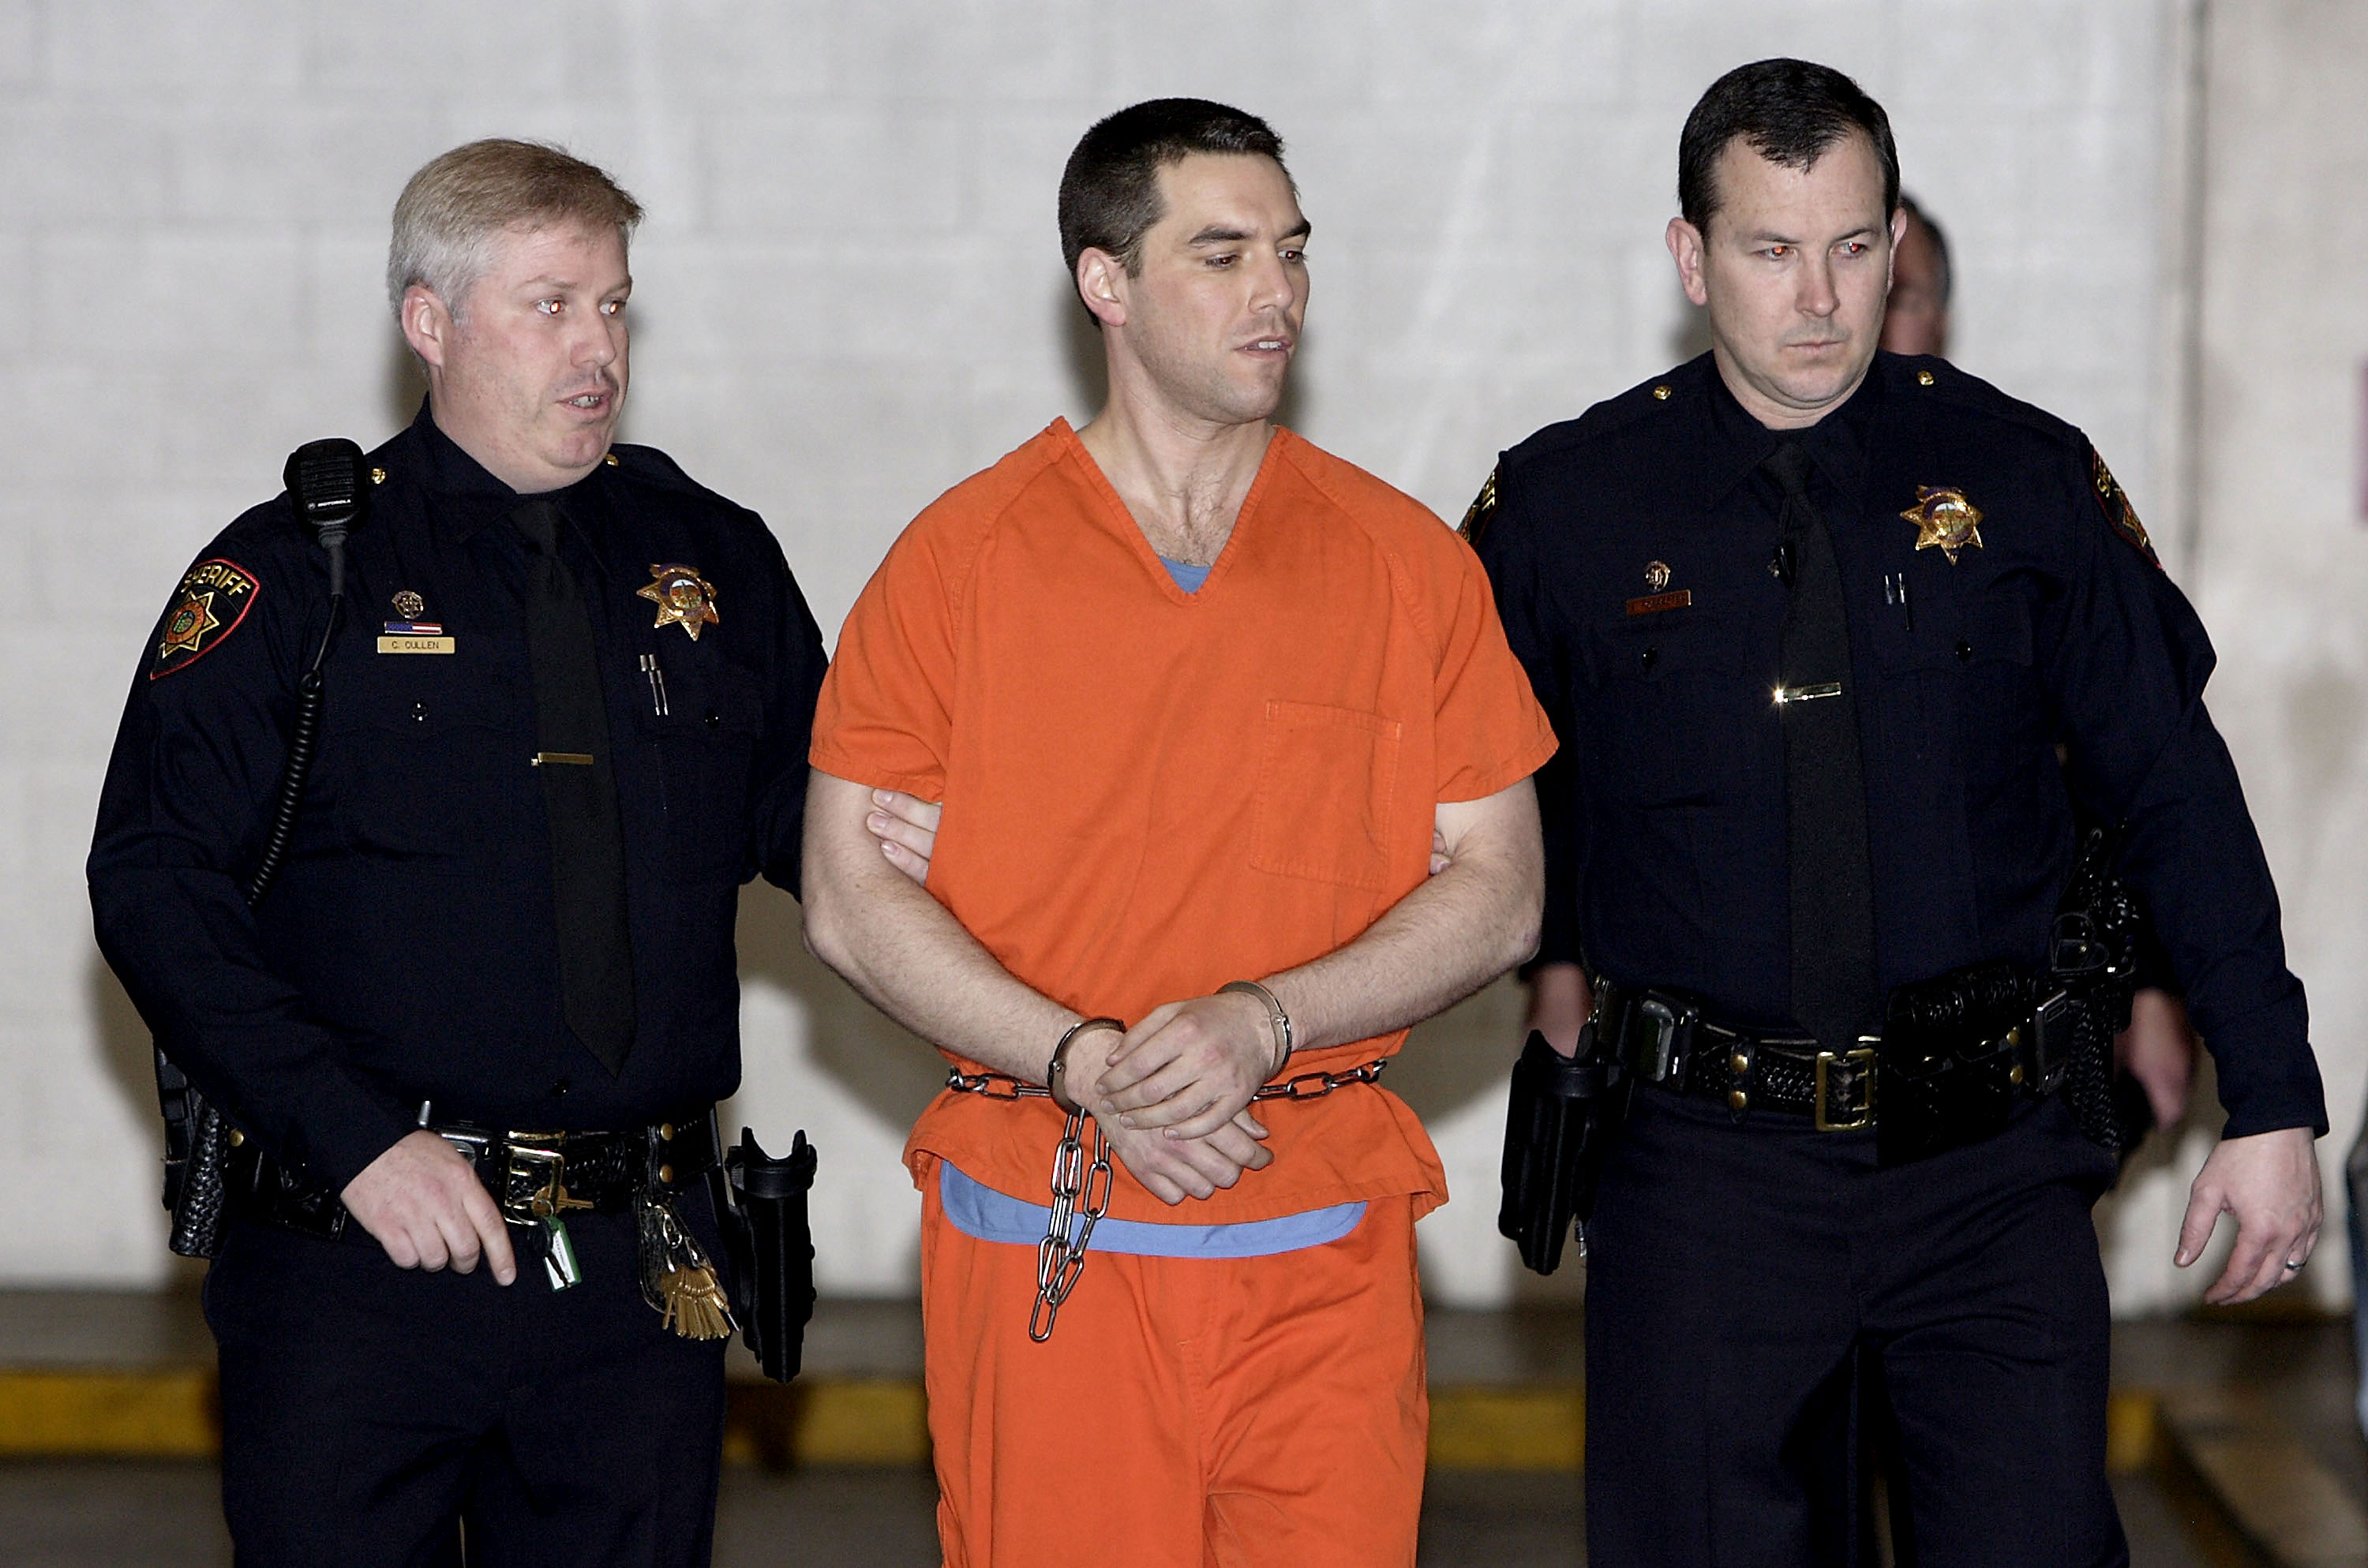 Murderer Scott Peterson speaks for first time in 20 years in new documentary